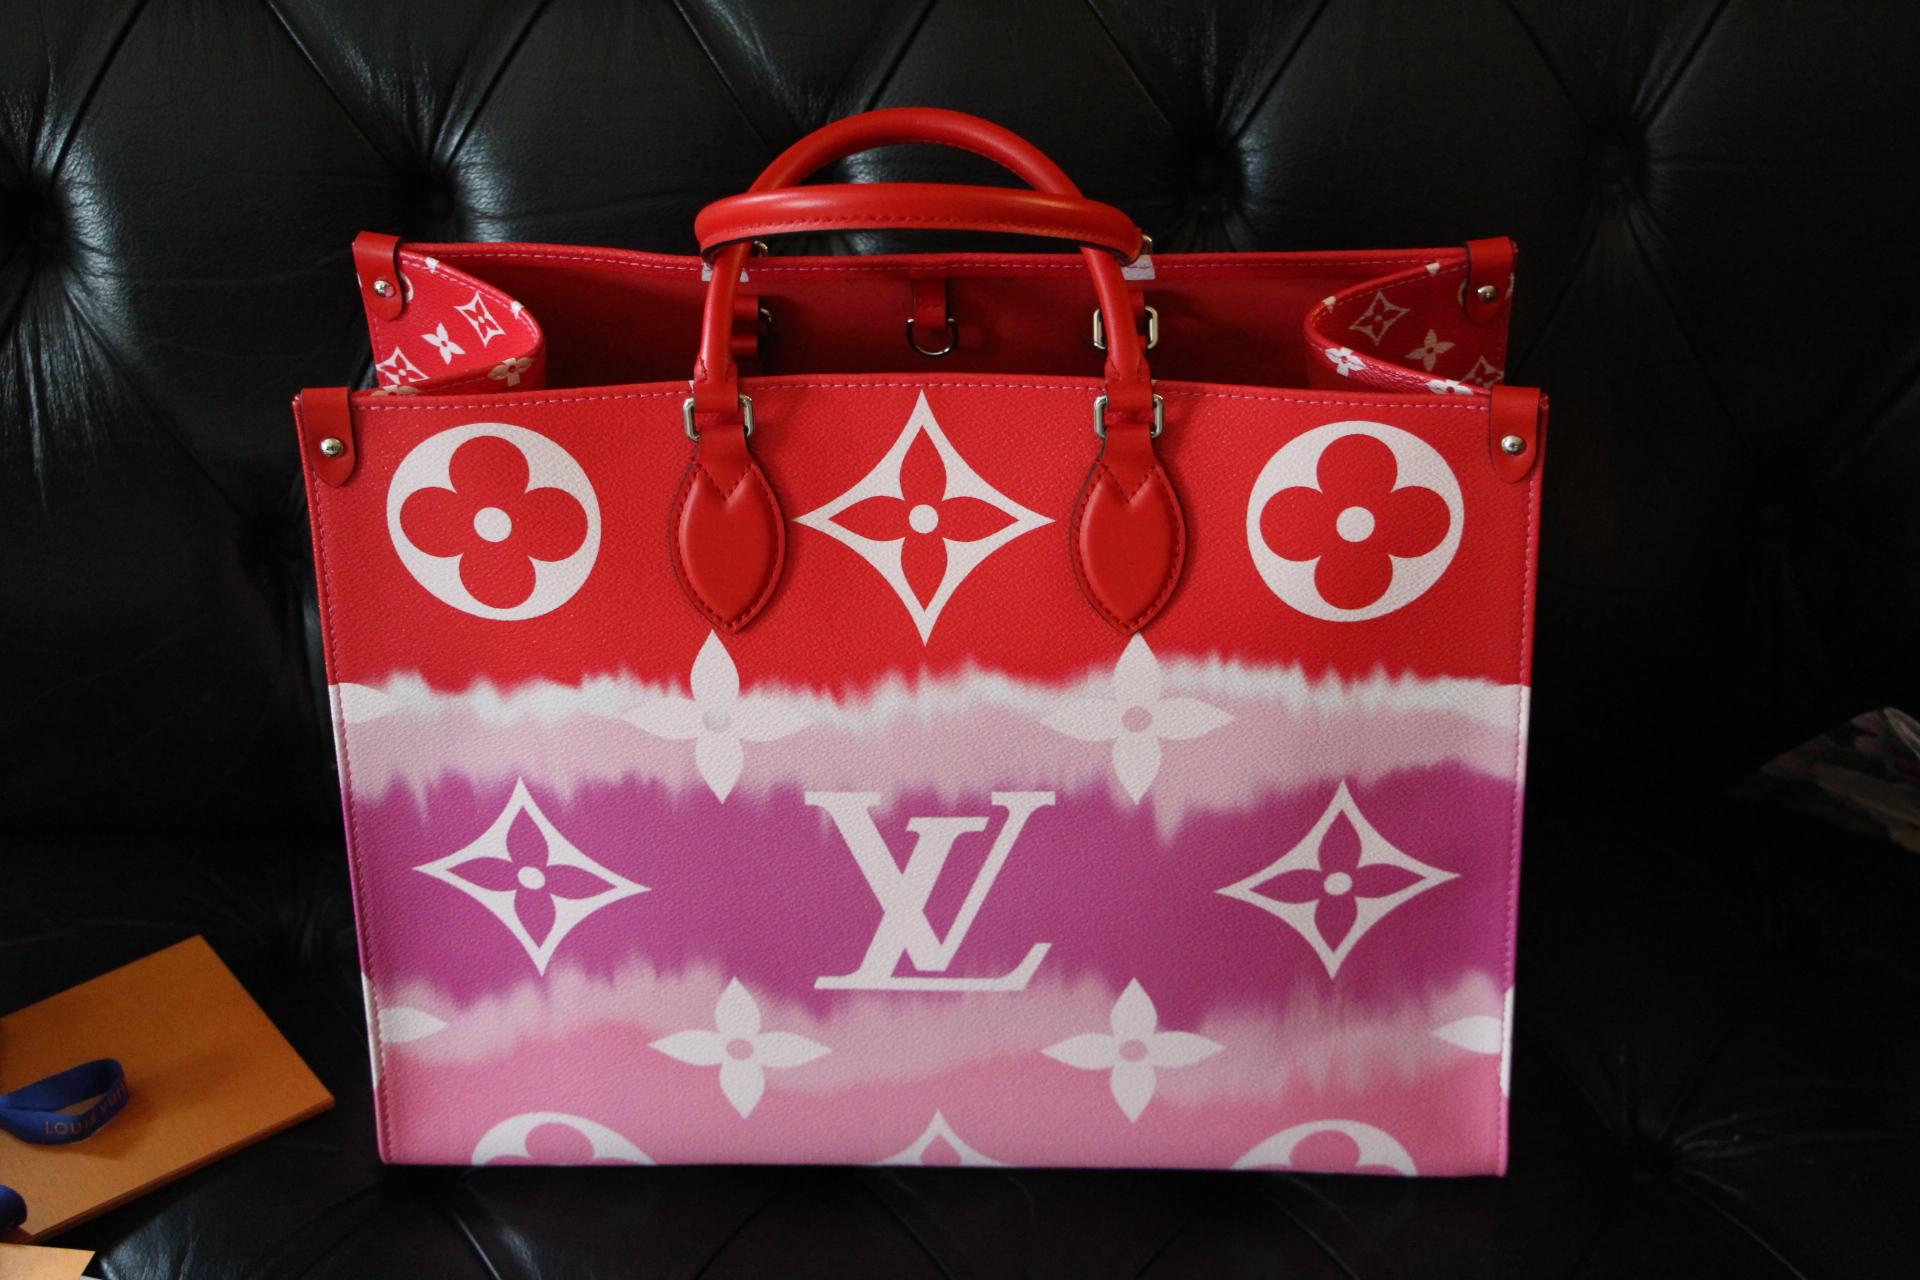 This magnificent brand new on the Go Escale bag by Louis Vuitton is red, purple and pink.

Monogram coated canvas
Cowhide-leather trim
Textile lining
Silver-color hardware
2 Toron top handles for hand or elbow carry
2 long leather shoulder straps